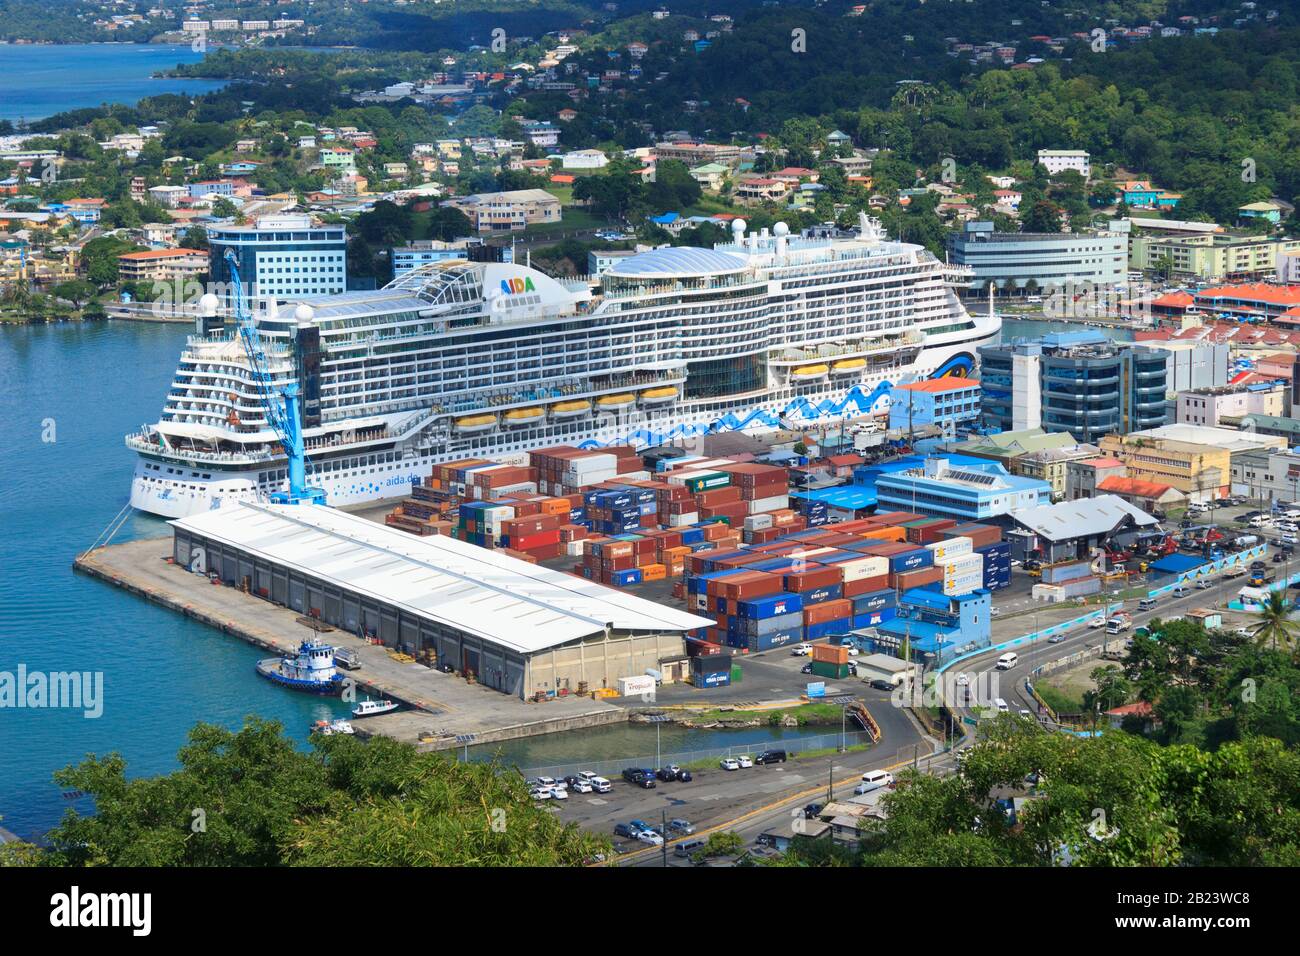 Castries, Saint Lucia - November 23, 2019. The Aida cruise ship at the harbor adjacent to the container shed on a bright sunny day Stock Photo